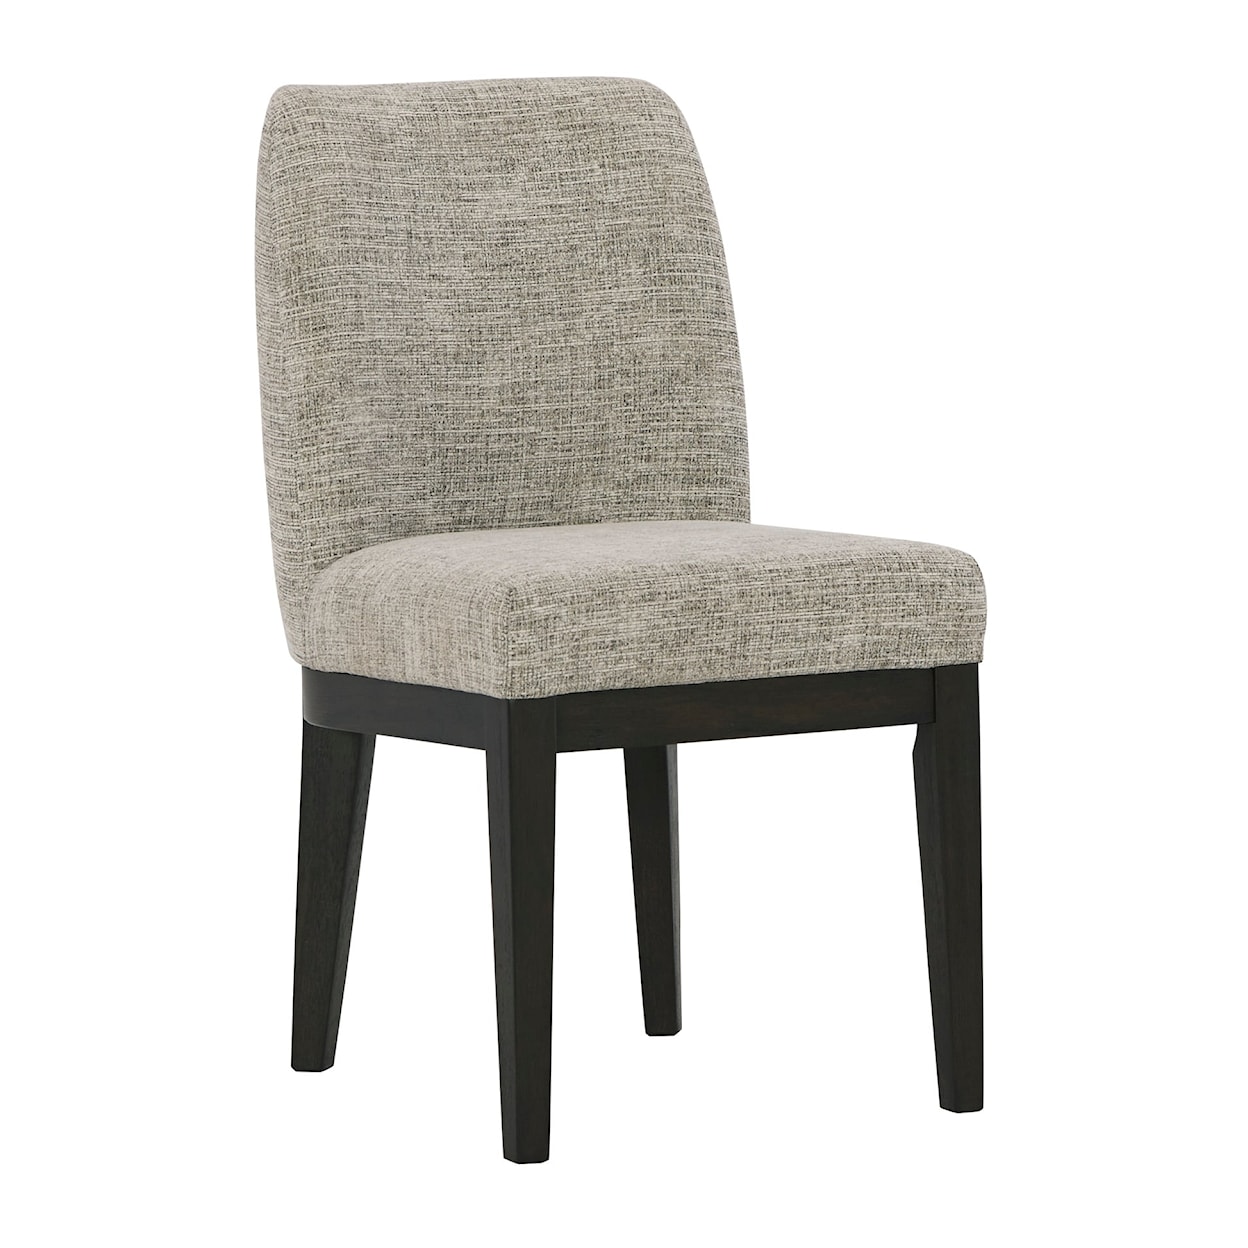 Belfort Select Everfield Dining Chair